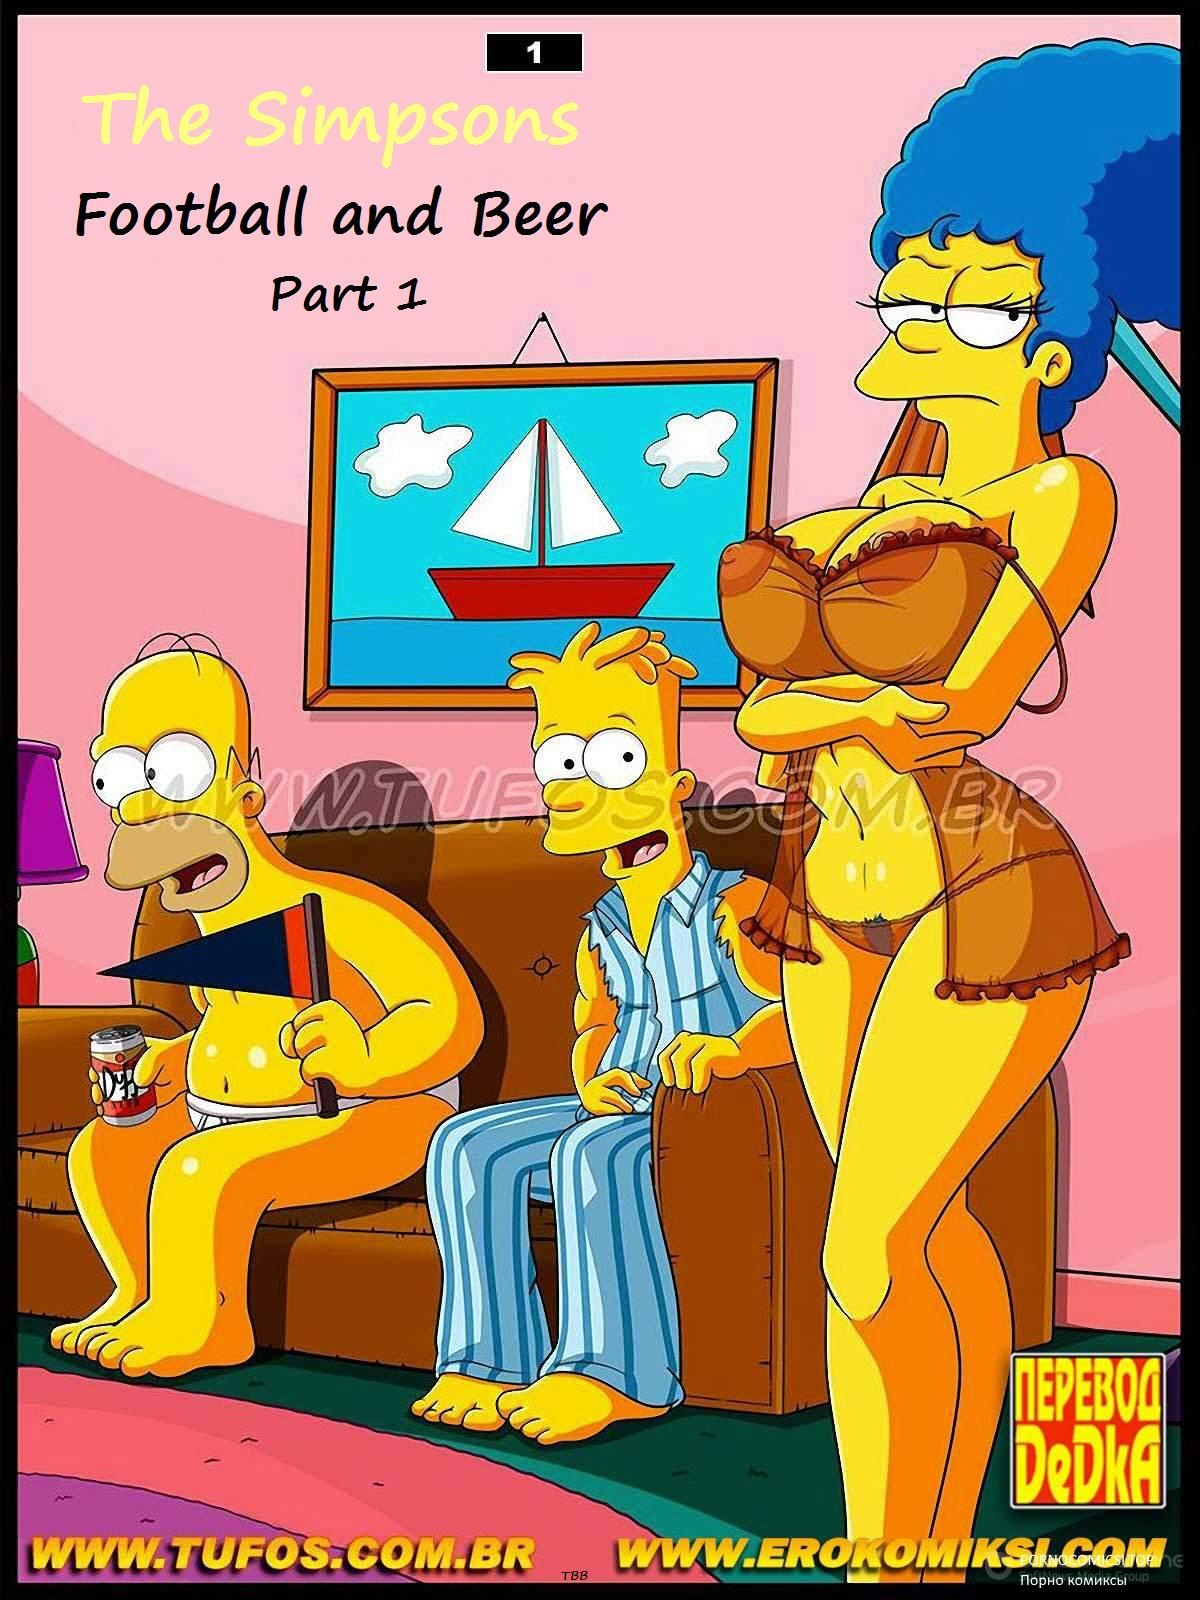 The Simpsons - Football and Beer